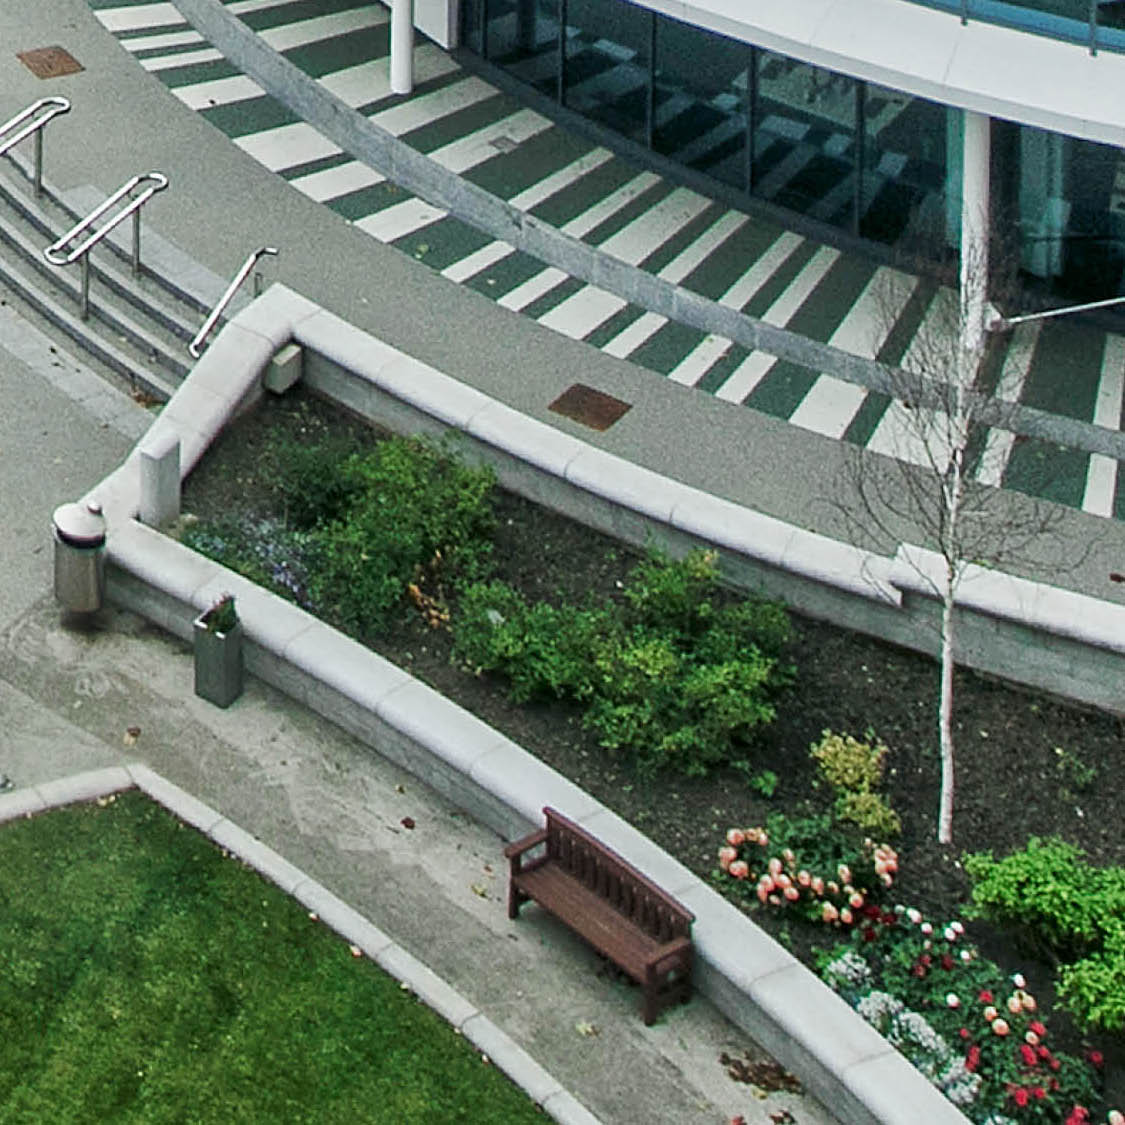 Ariel shot of a bench, lawn and flower bed surrounded by concrete paths.